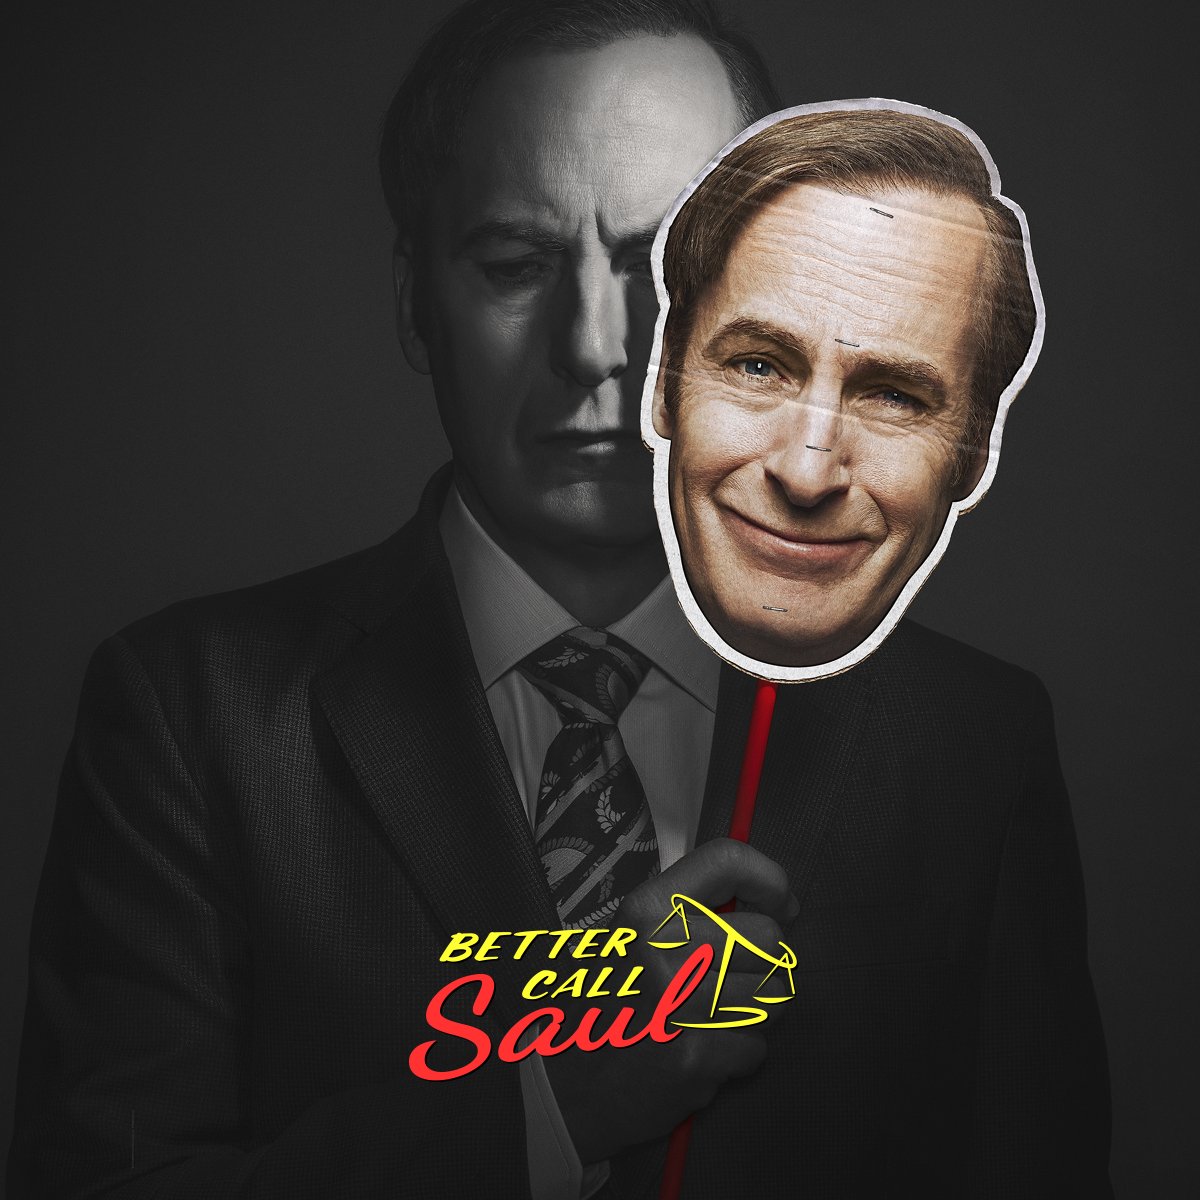 Tune in for your last chance to call Jimmy before he’s “S’ll Good, Man”!
Follow the music behind @BetterCallSaul by talented series composer @DavePorterMusic and fantastic music supervision by @ThomasGolubic and @SMVcrew!
Listen now: sptfy.com/bcsofficial